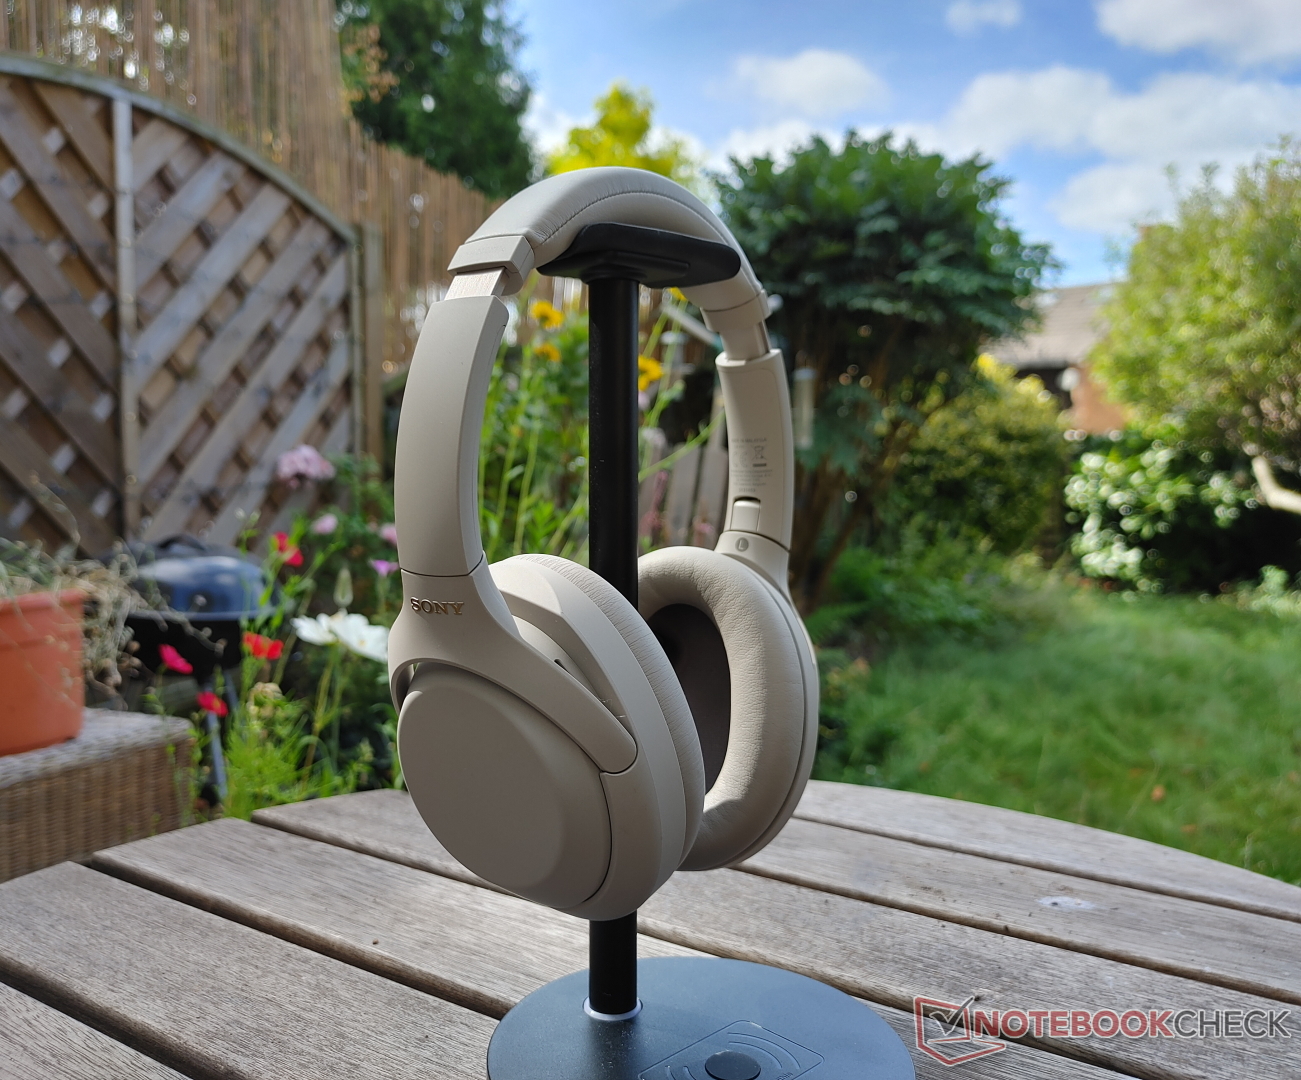 Sony WH-1000XM4 review: A nearly flawless noise-canceling headphone - CNET